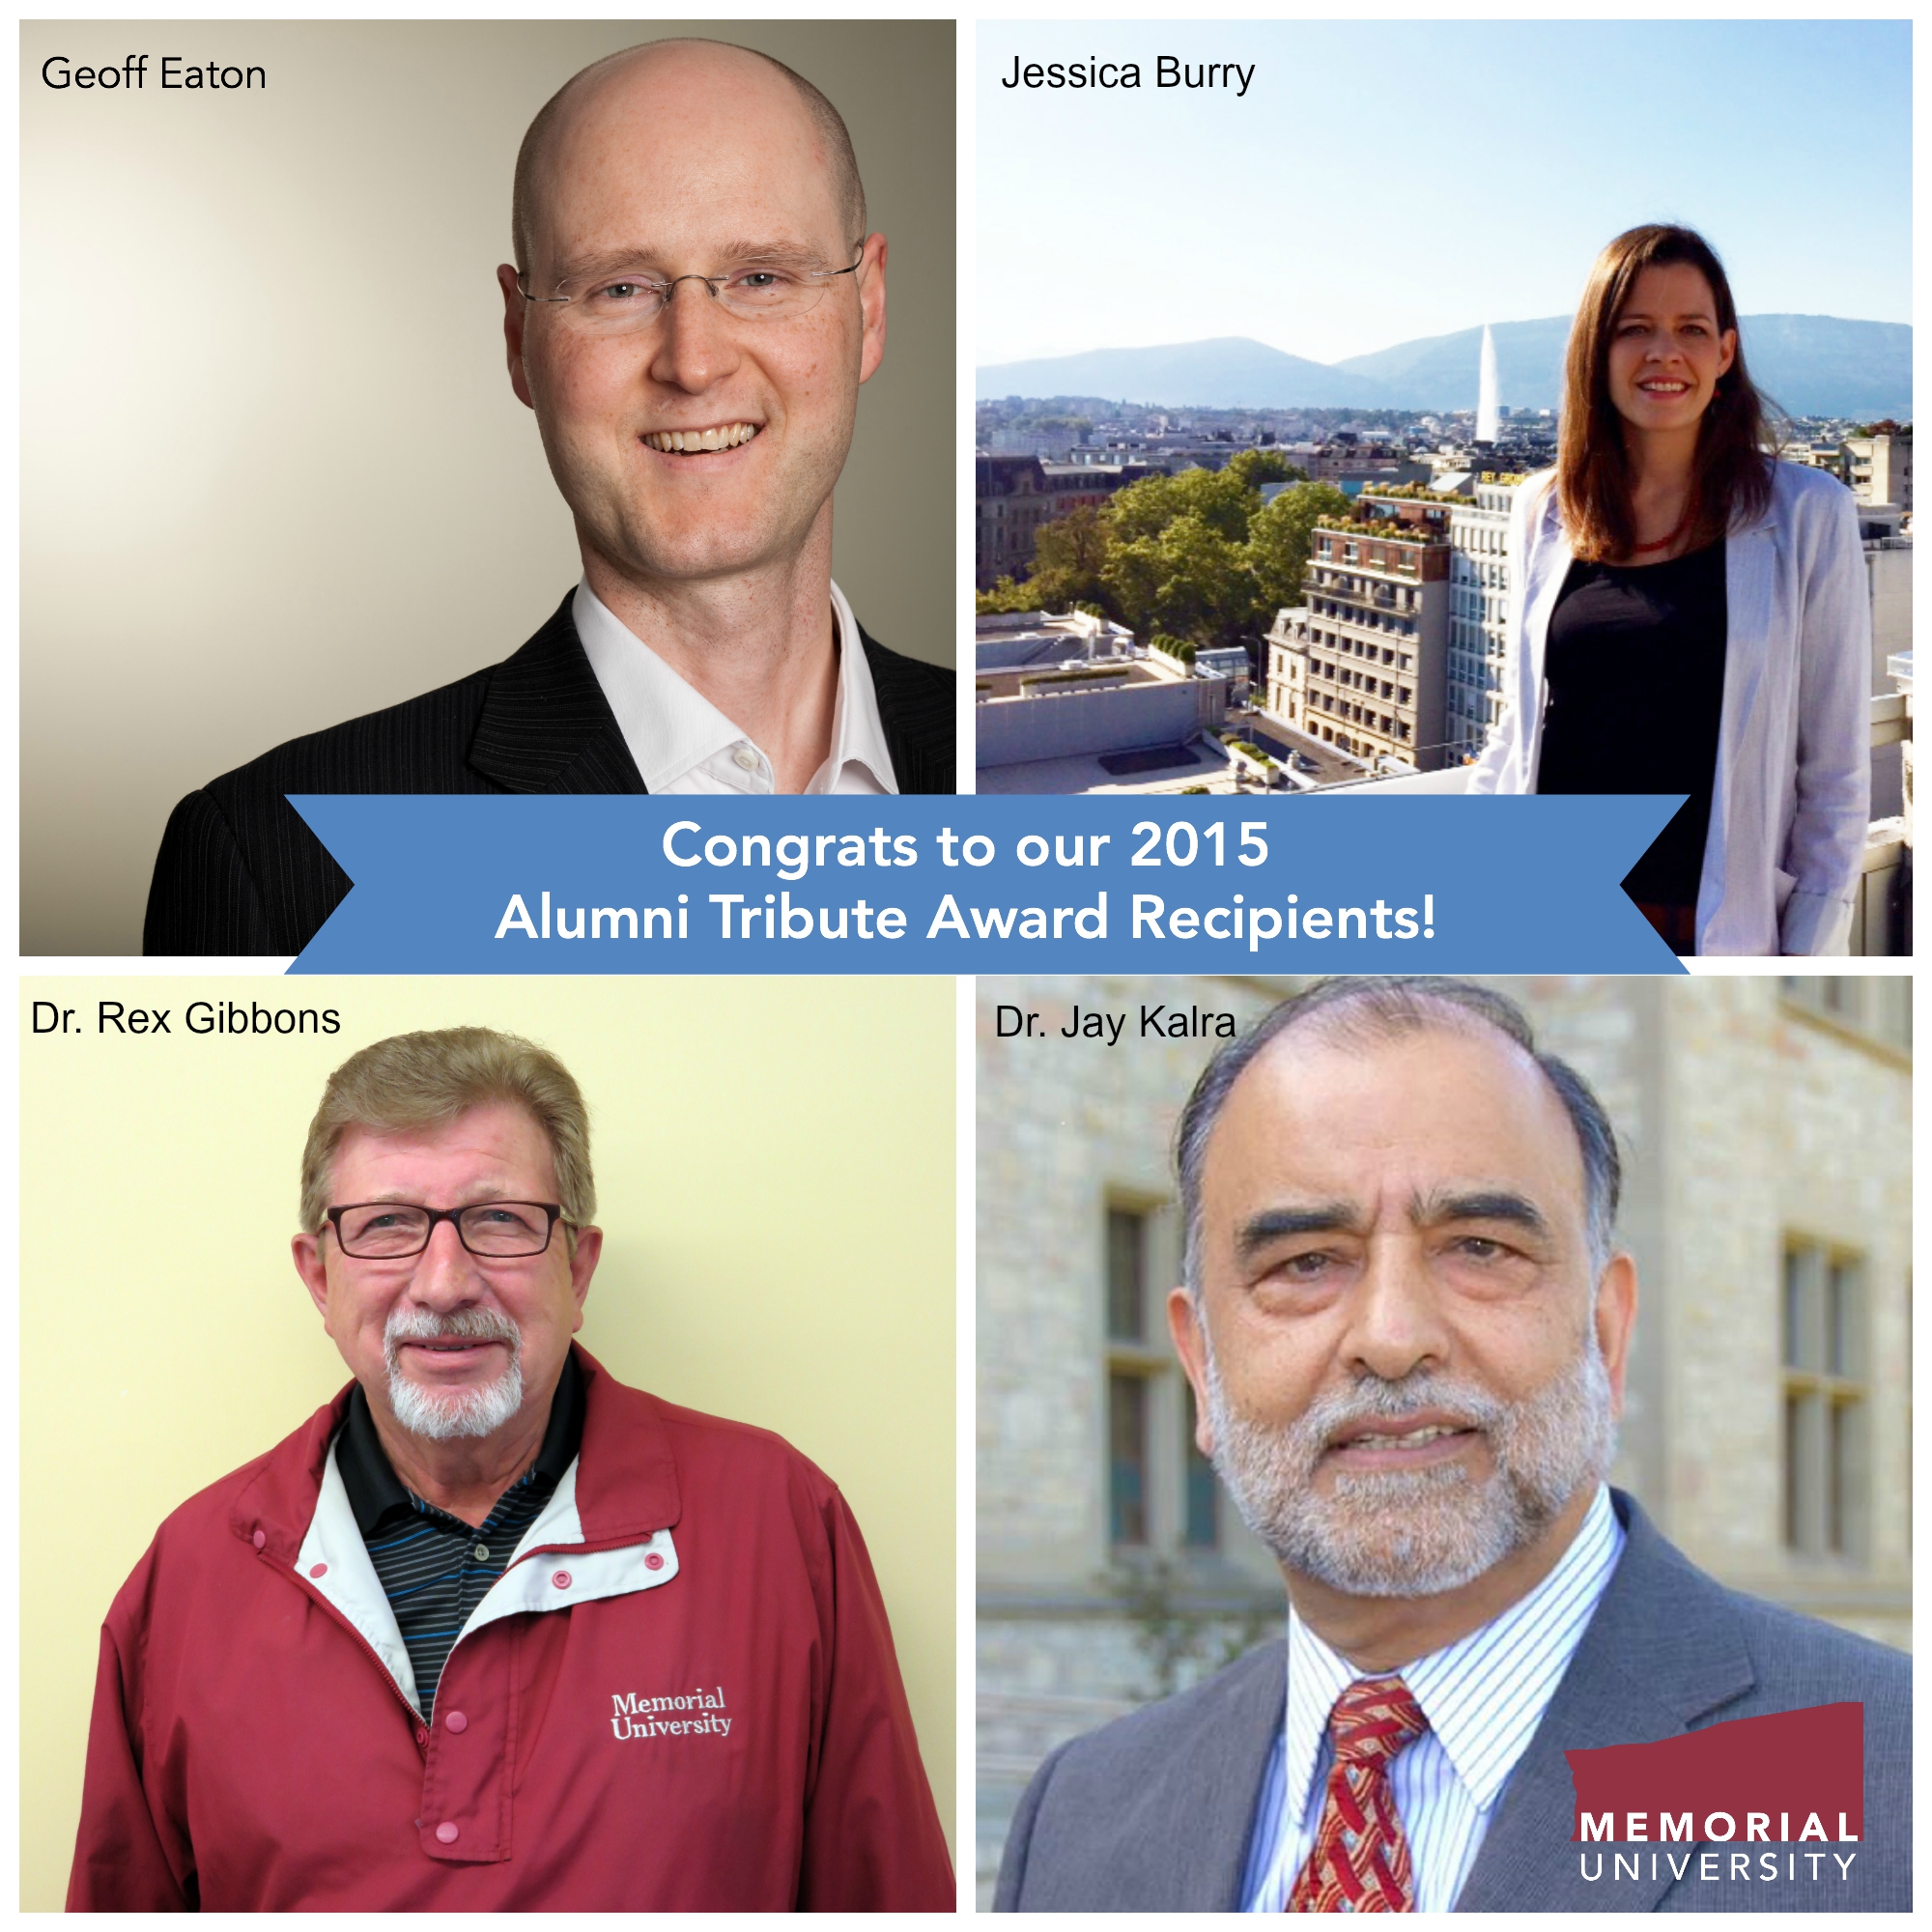 The 34th annual Alumni Tribute Awards take place Monday, Oct. 19.